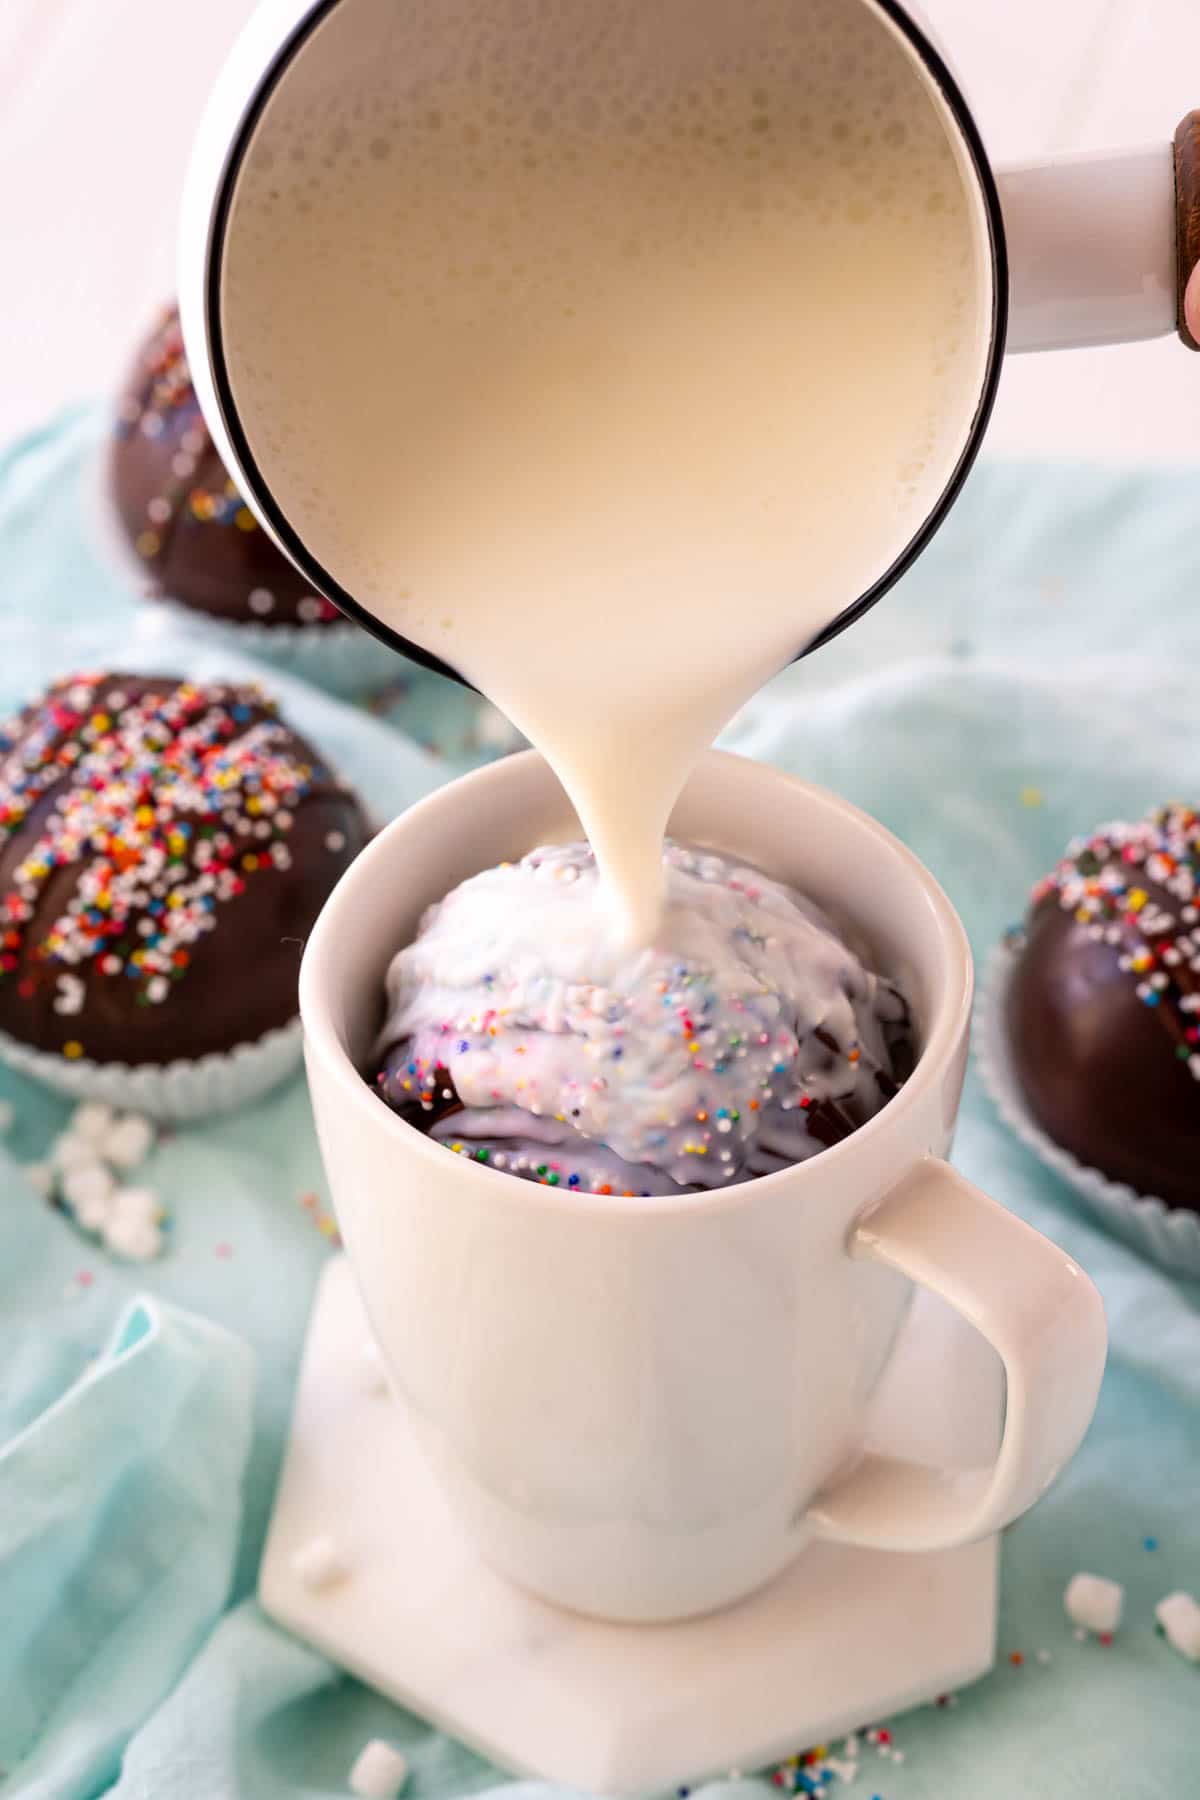 Milk being poured over a hot chocolate bomb in a mug